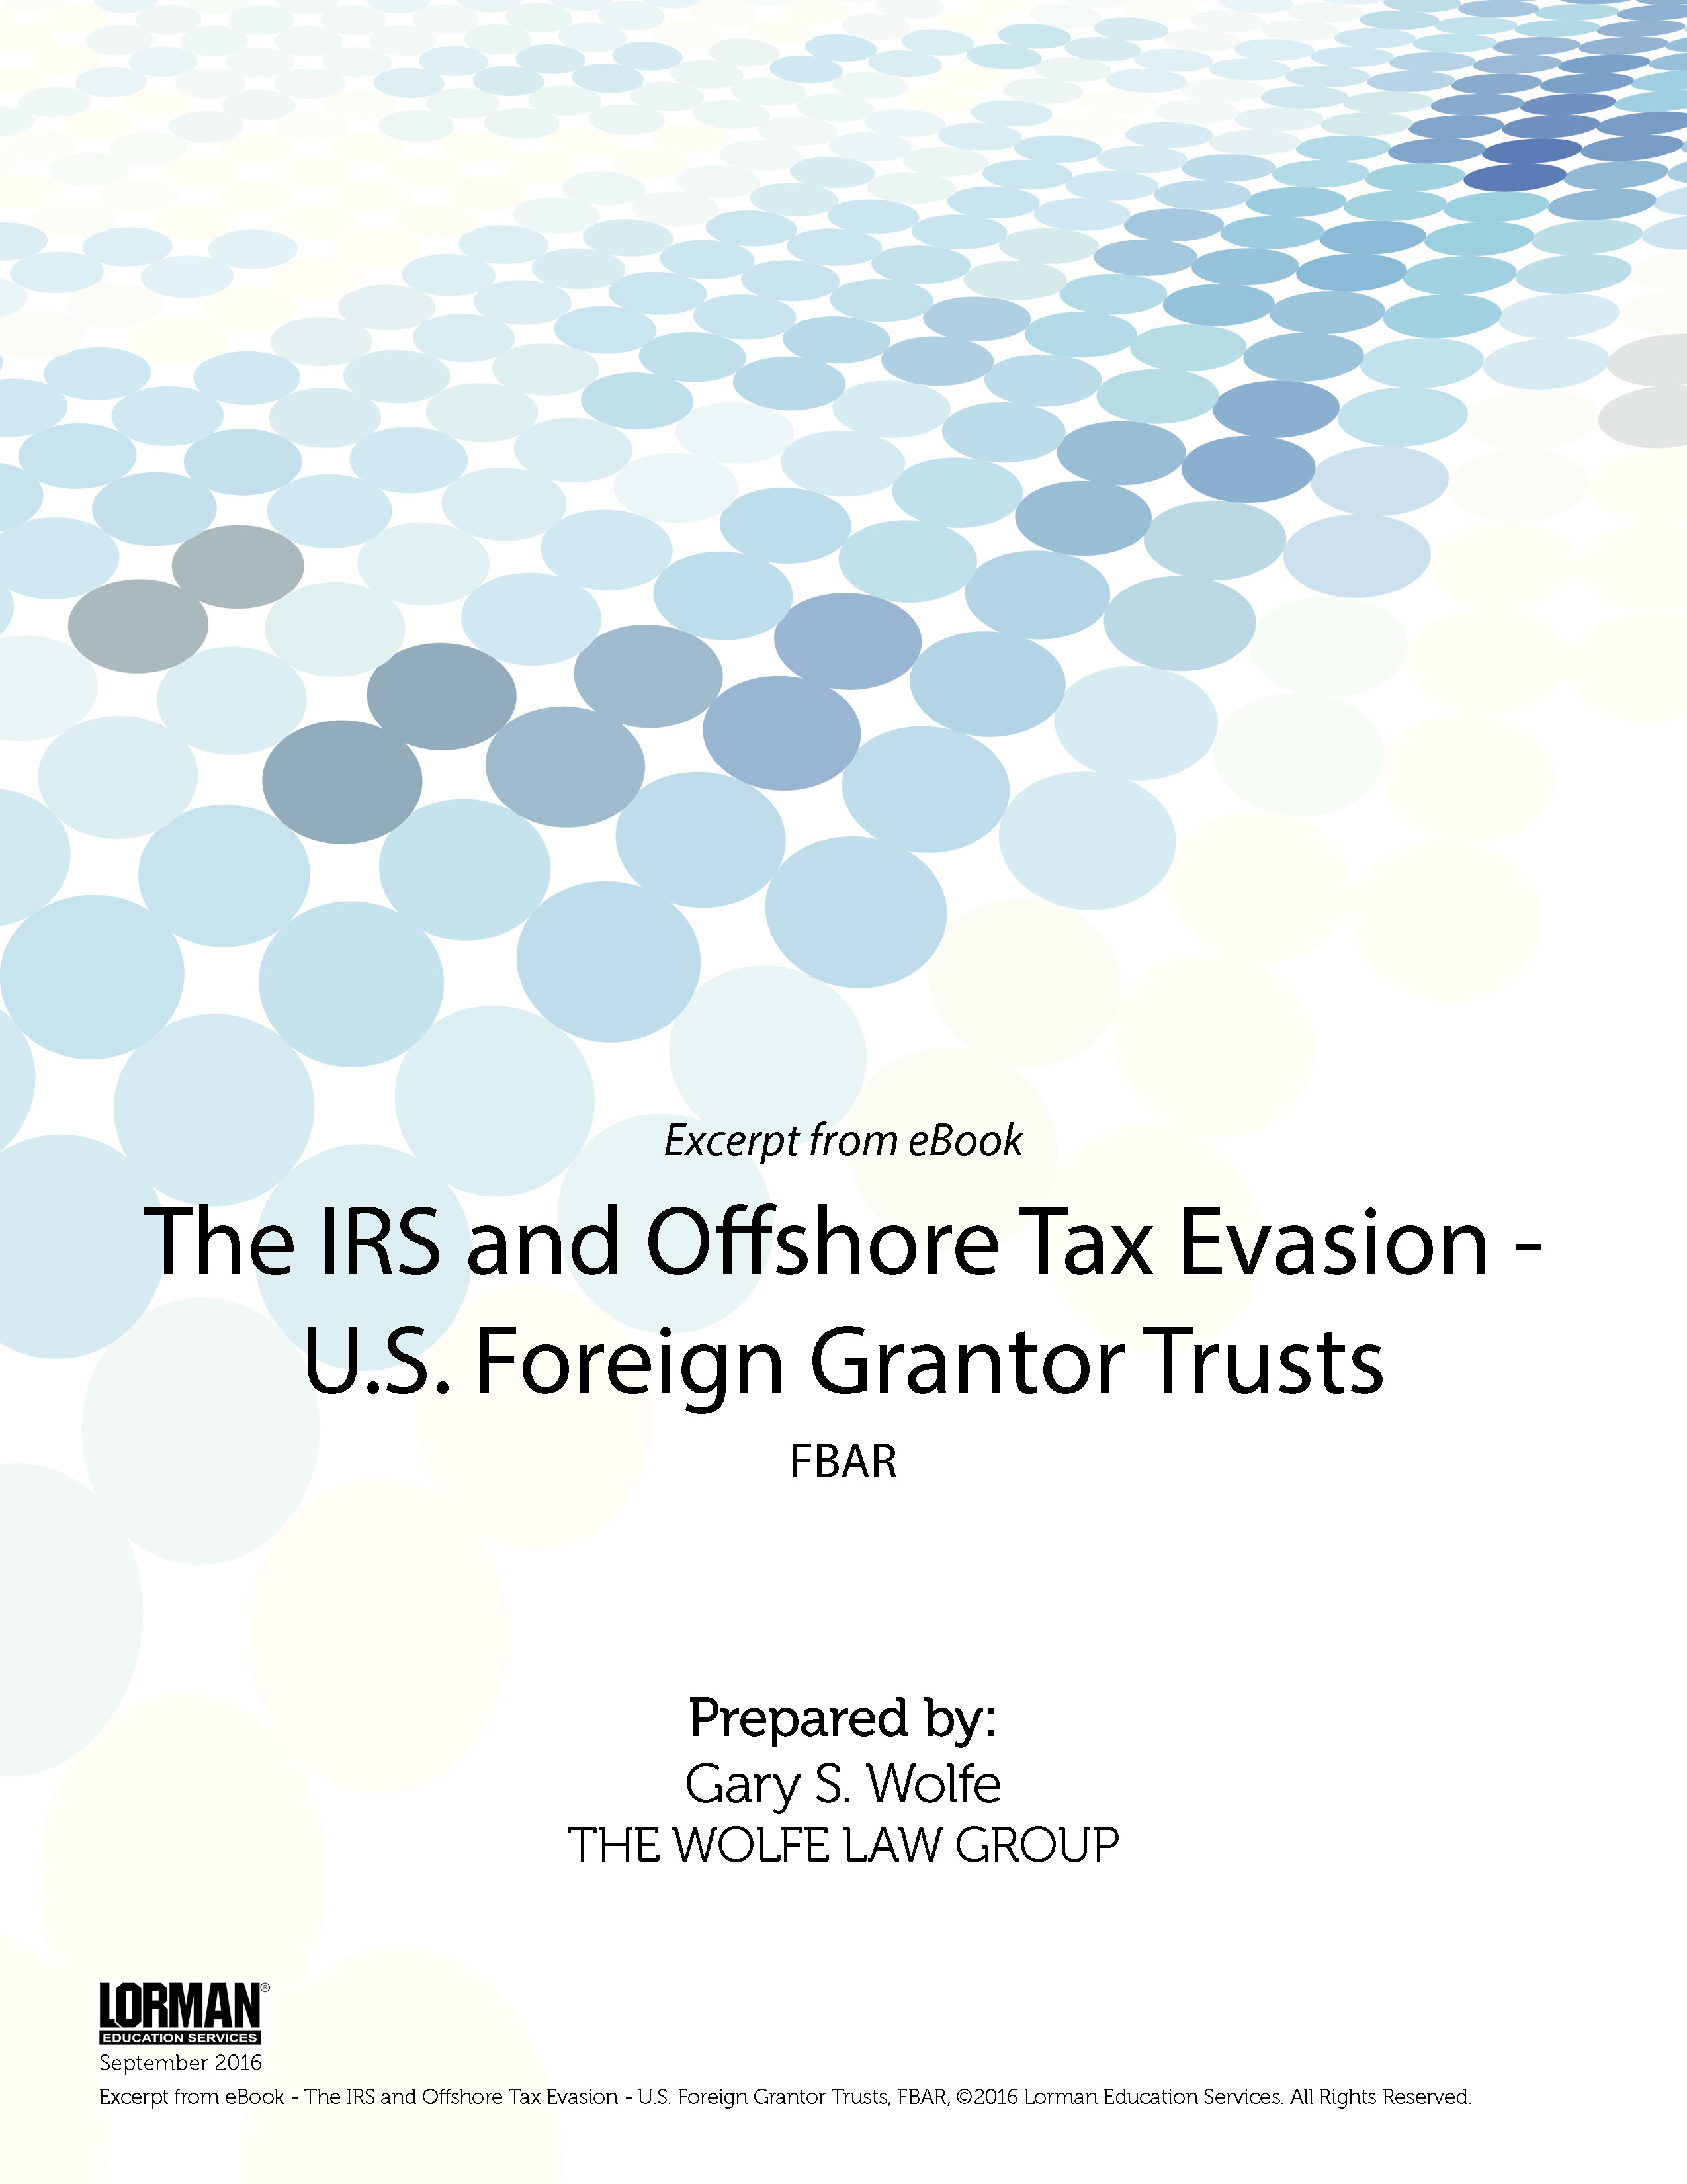 The IRS and Offshore Tax Evasion - U.S. Foreign Grantor Trusts: FBAR